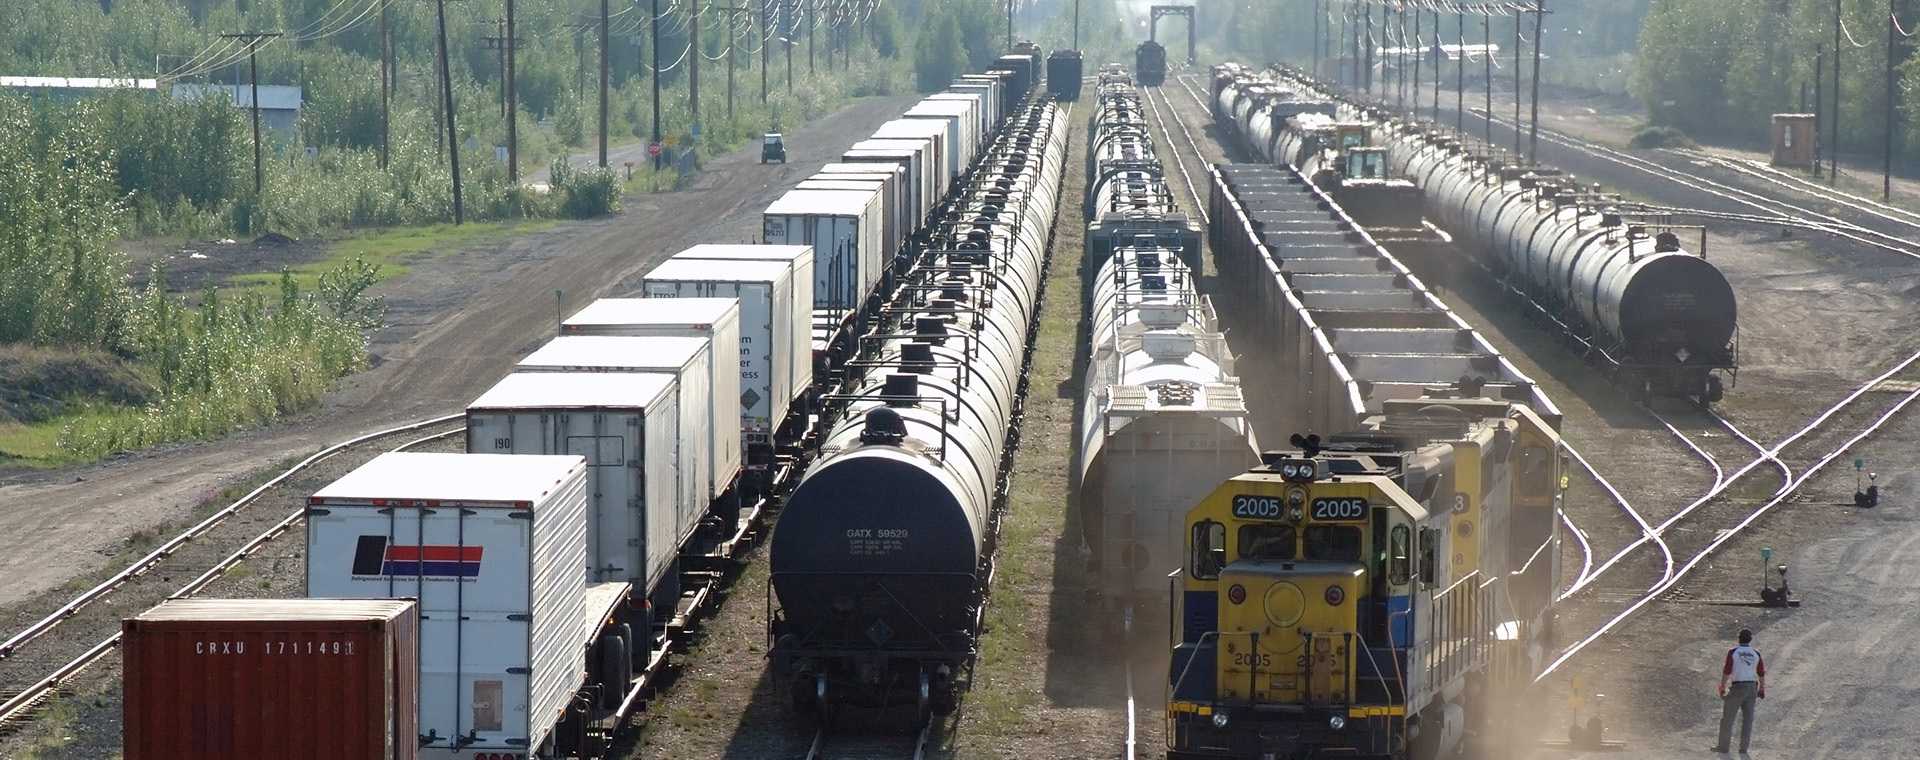 Multiple freight trains in a train yard.